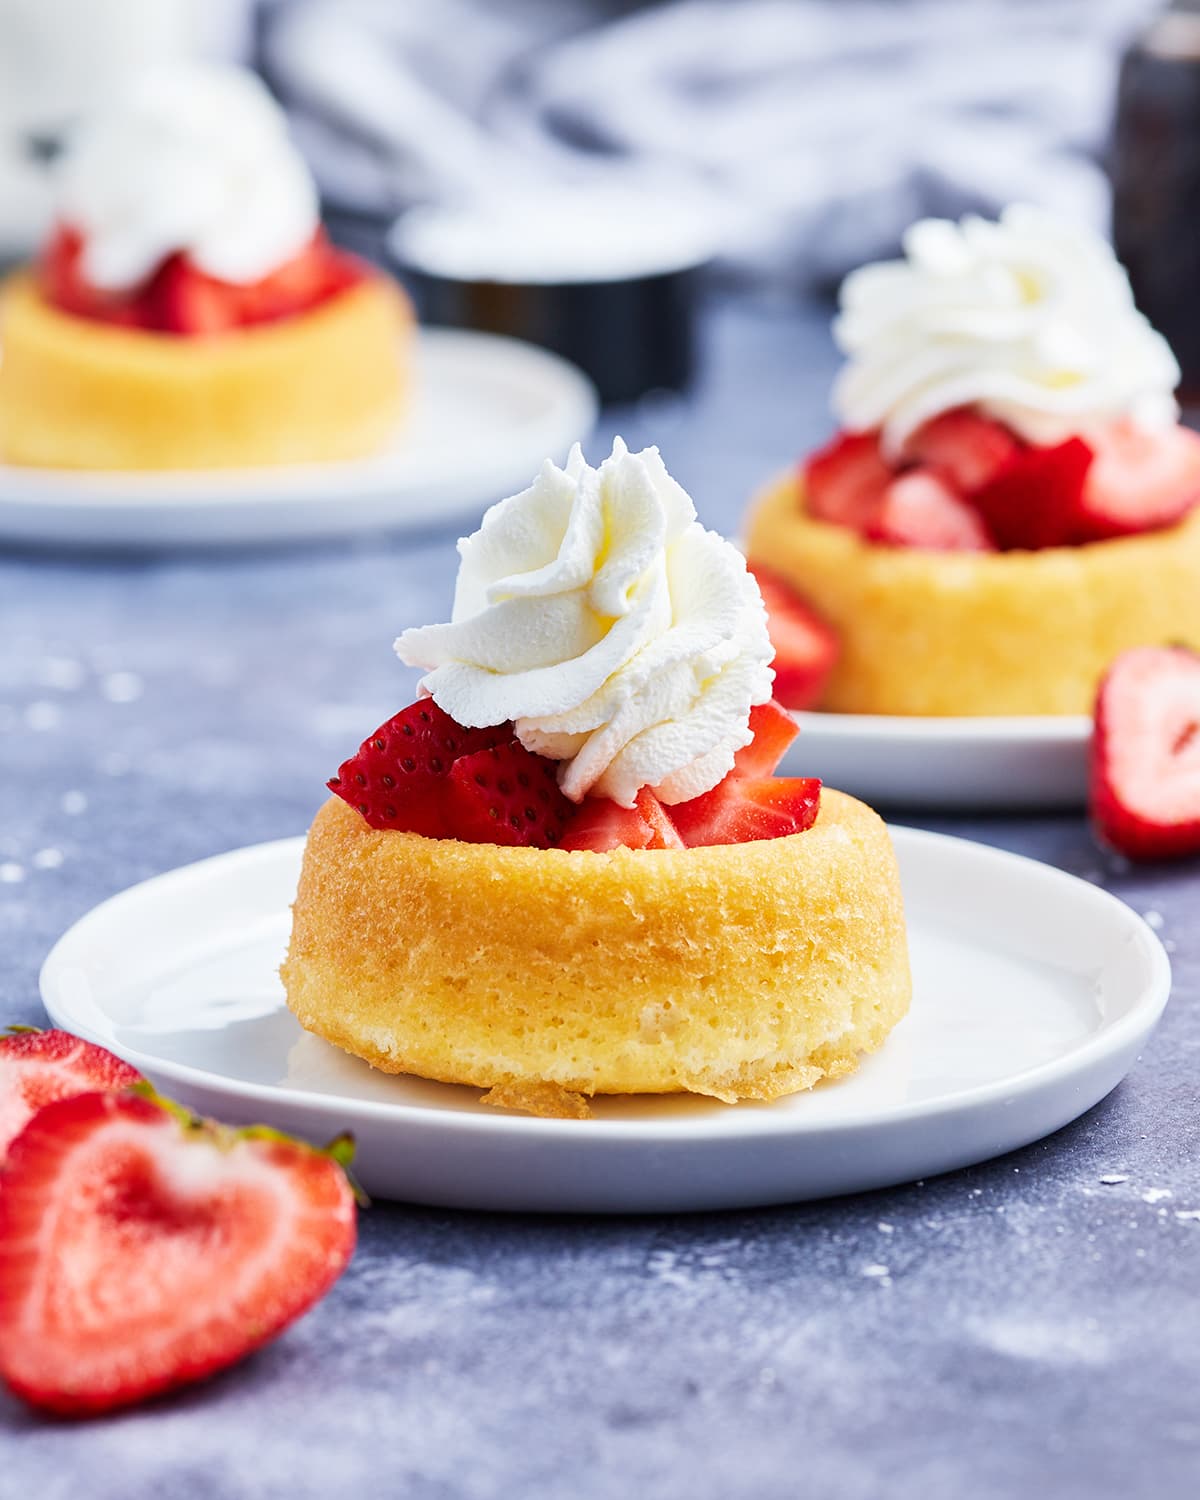 A mini pound cake topped with strawberries and whipped cream on a plate.